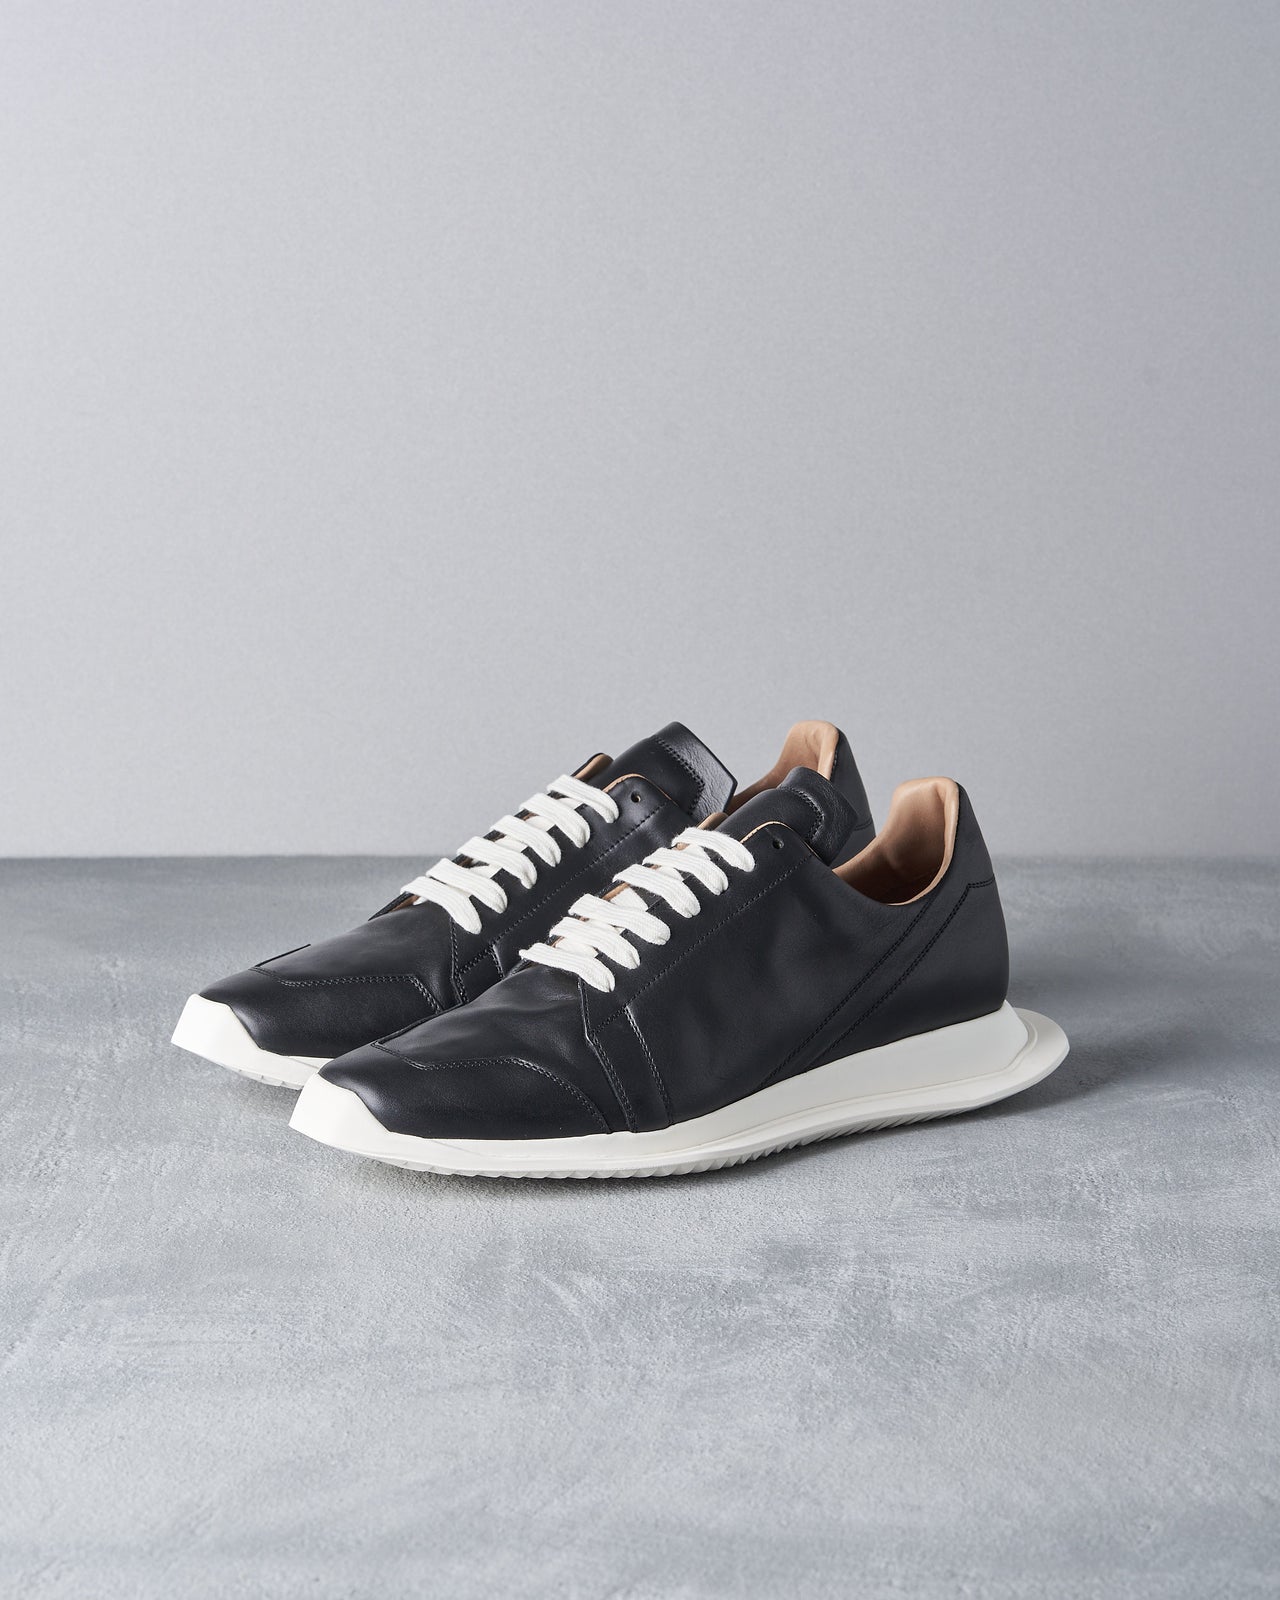 Rick Owens FW 2018 Oblique Lace up runner